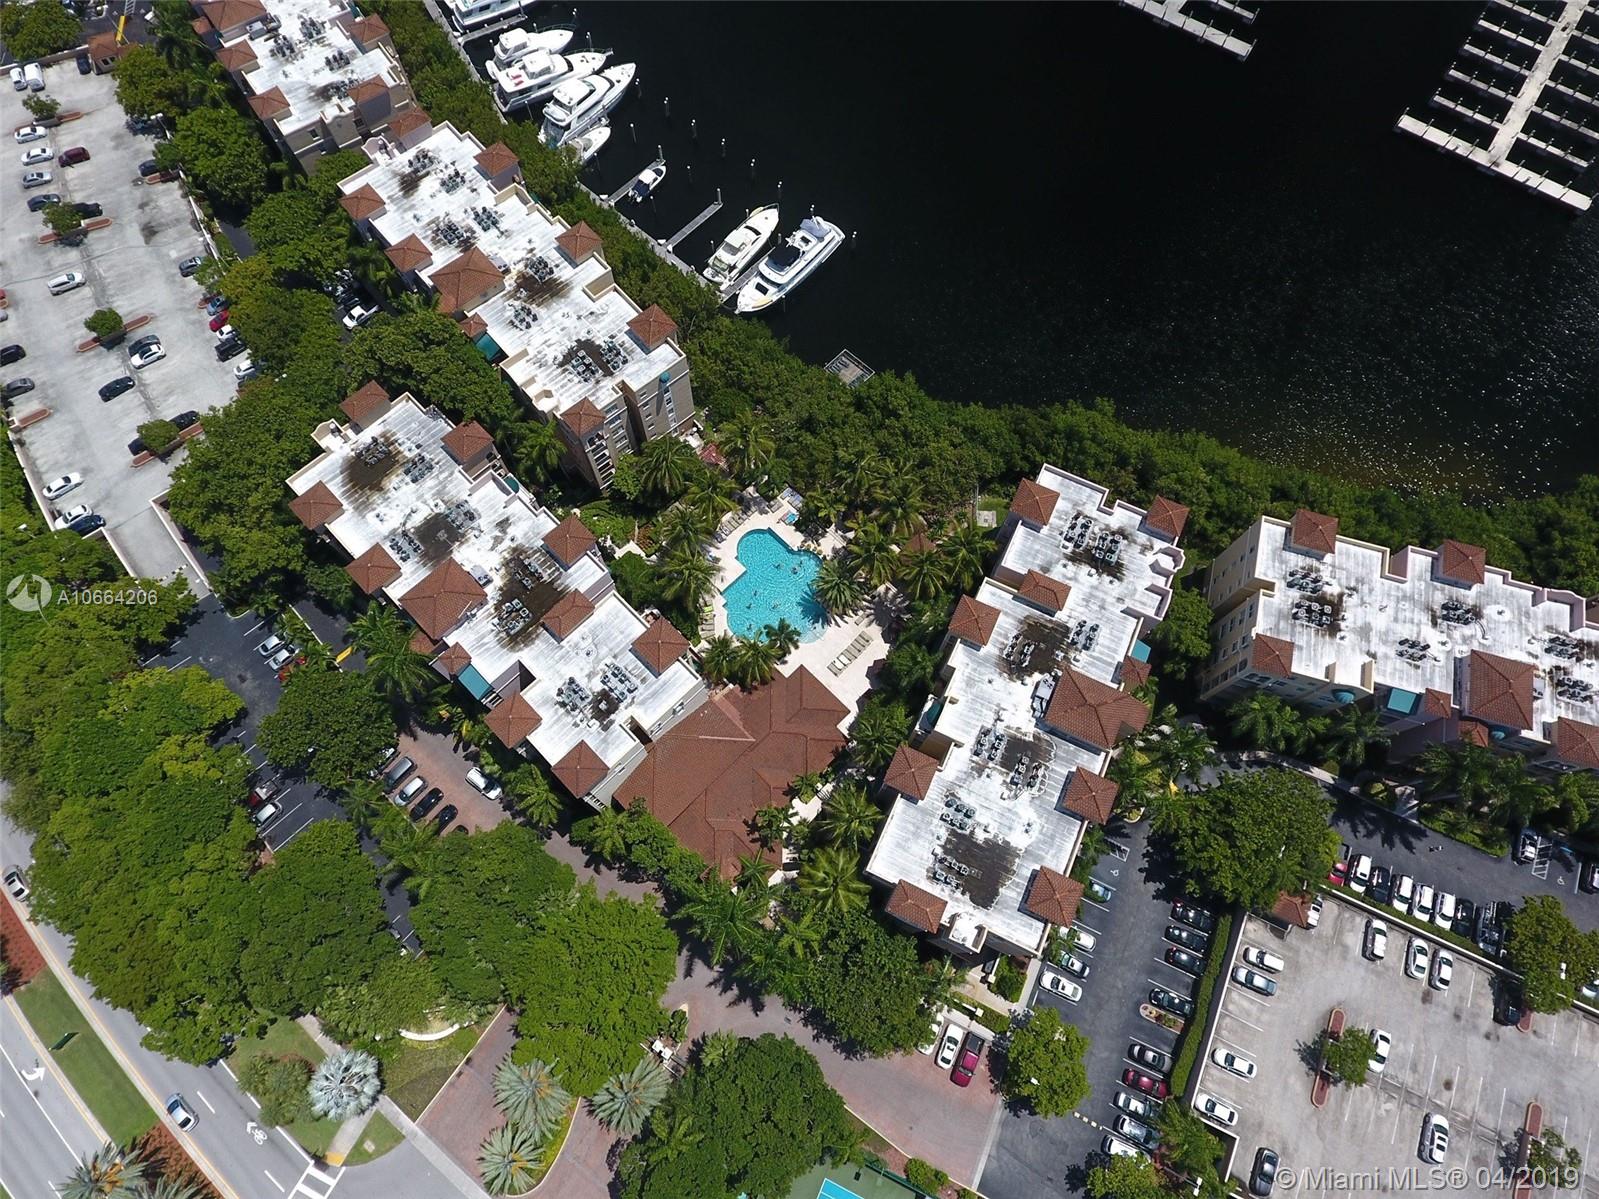 yacht club at aventura for sale